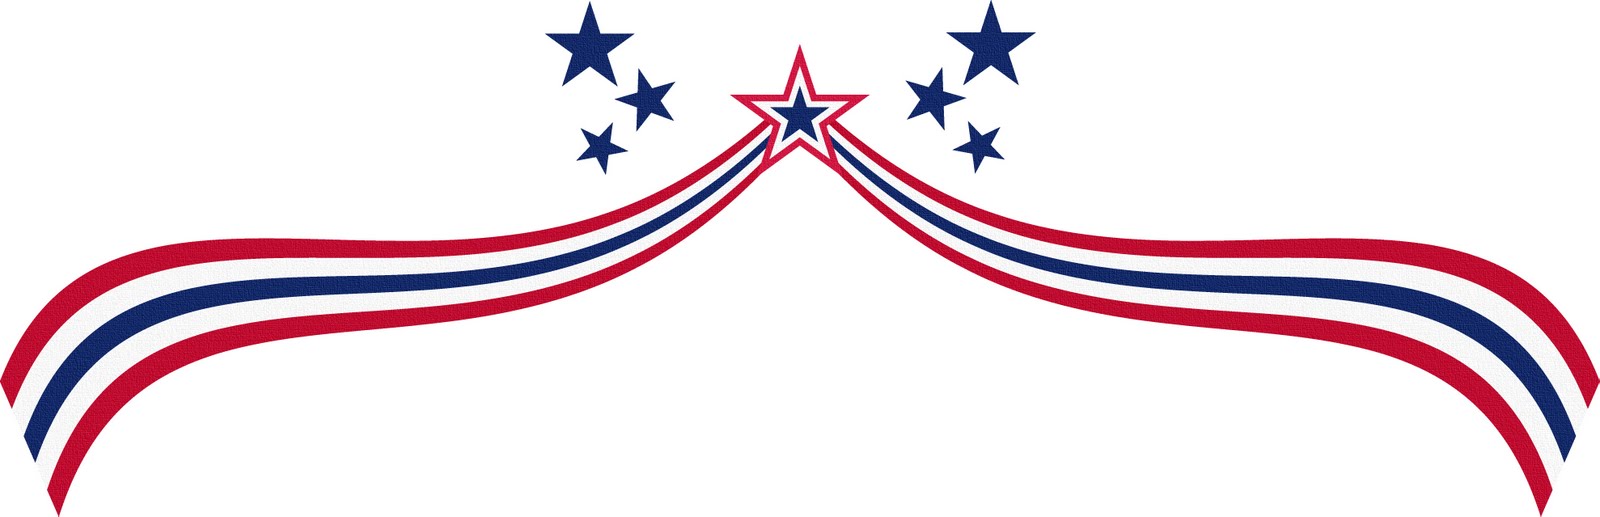 4th of july borders clipart kid